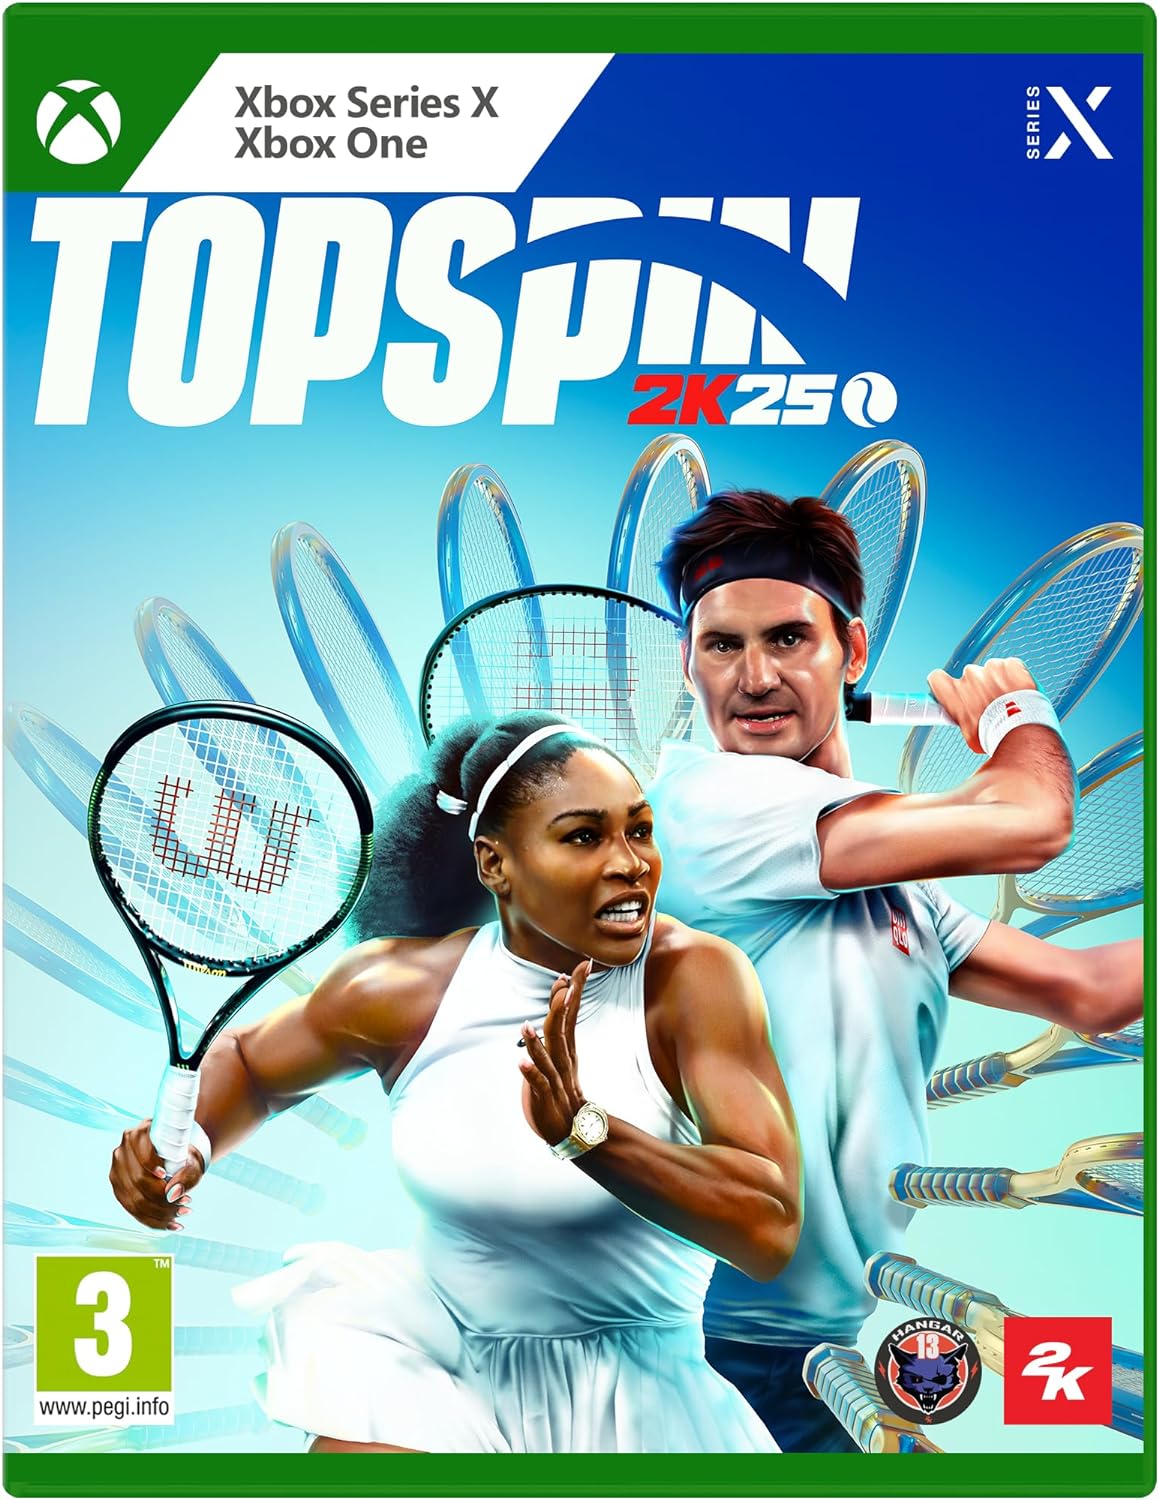 TopSpin 2K25 Grand Slam Edition Digital Download Key (Xbox One/Series X): VPN Activated Key